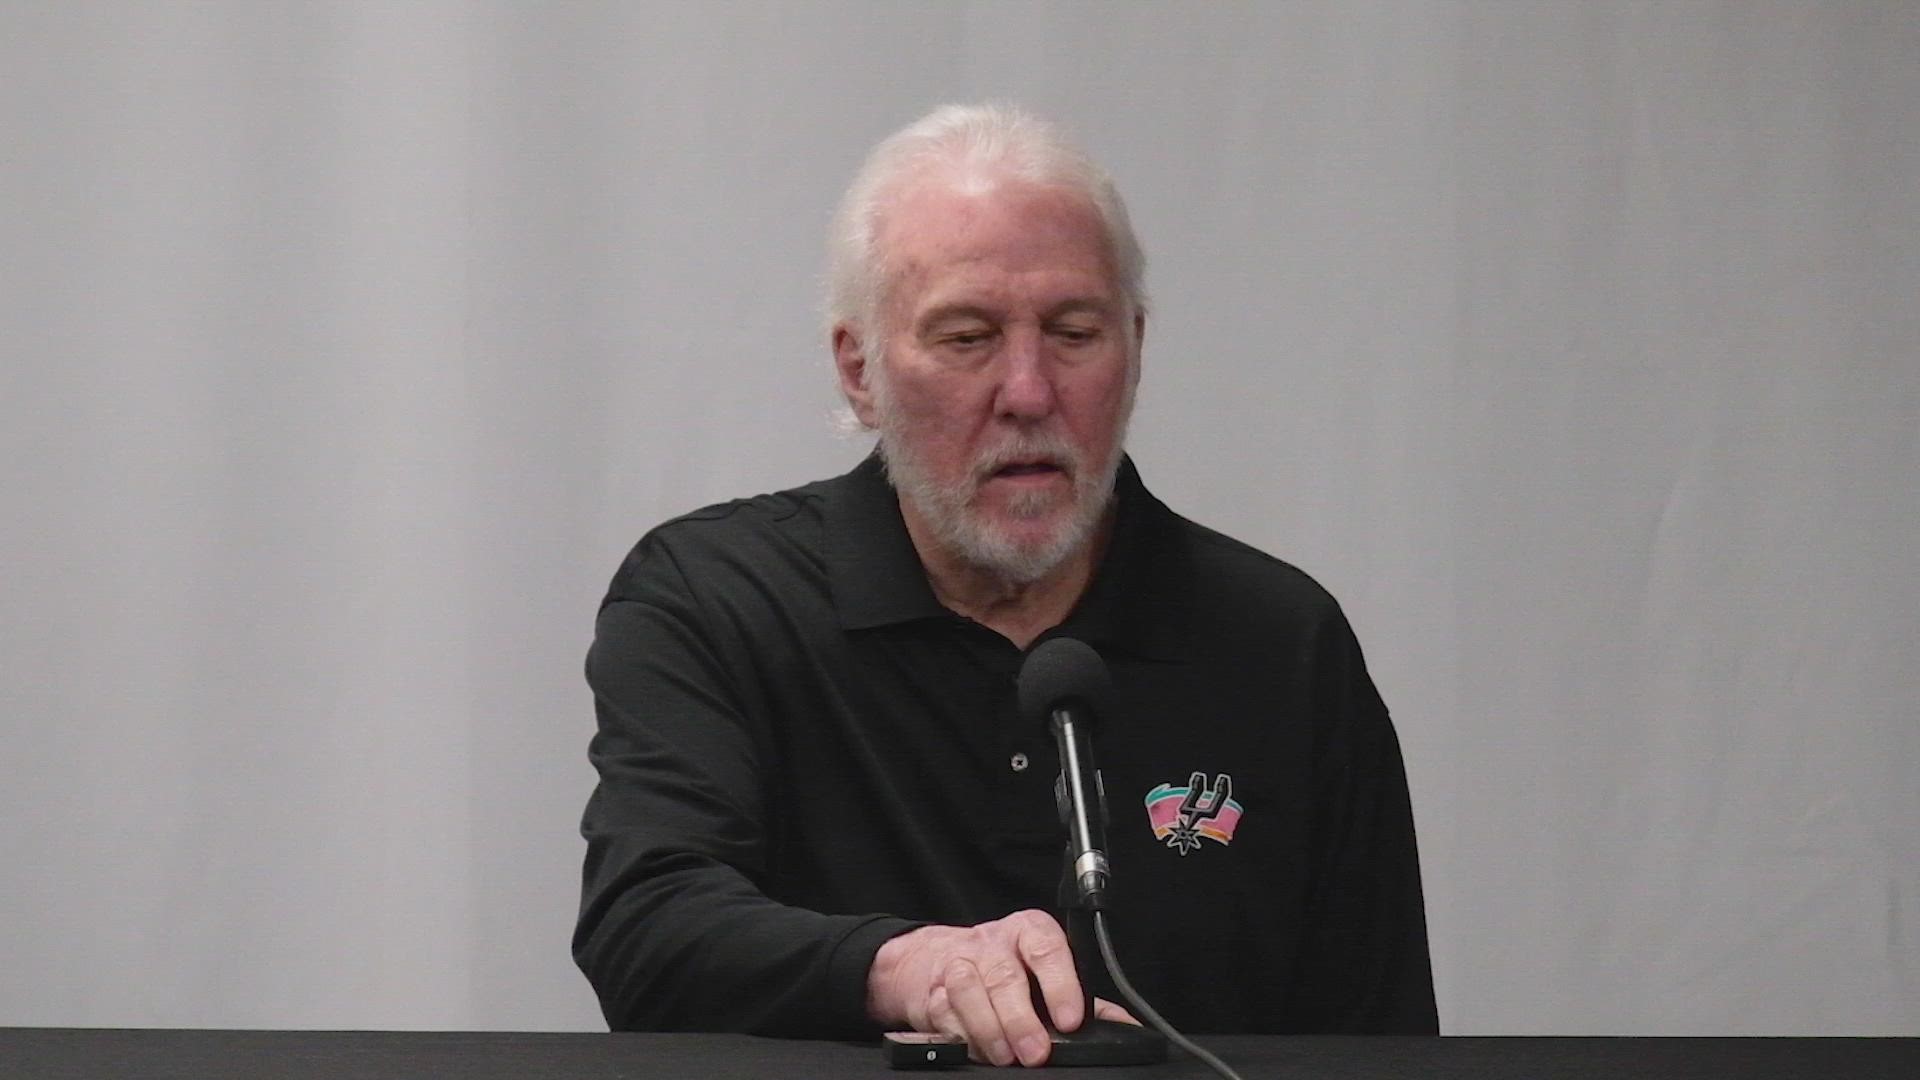 Pop responded to queries about Chauncey Billups, Doug McDermott's knee, and more.